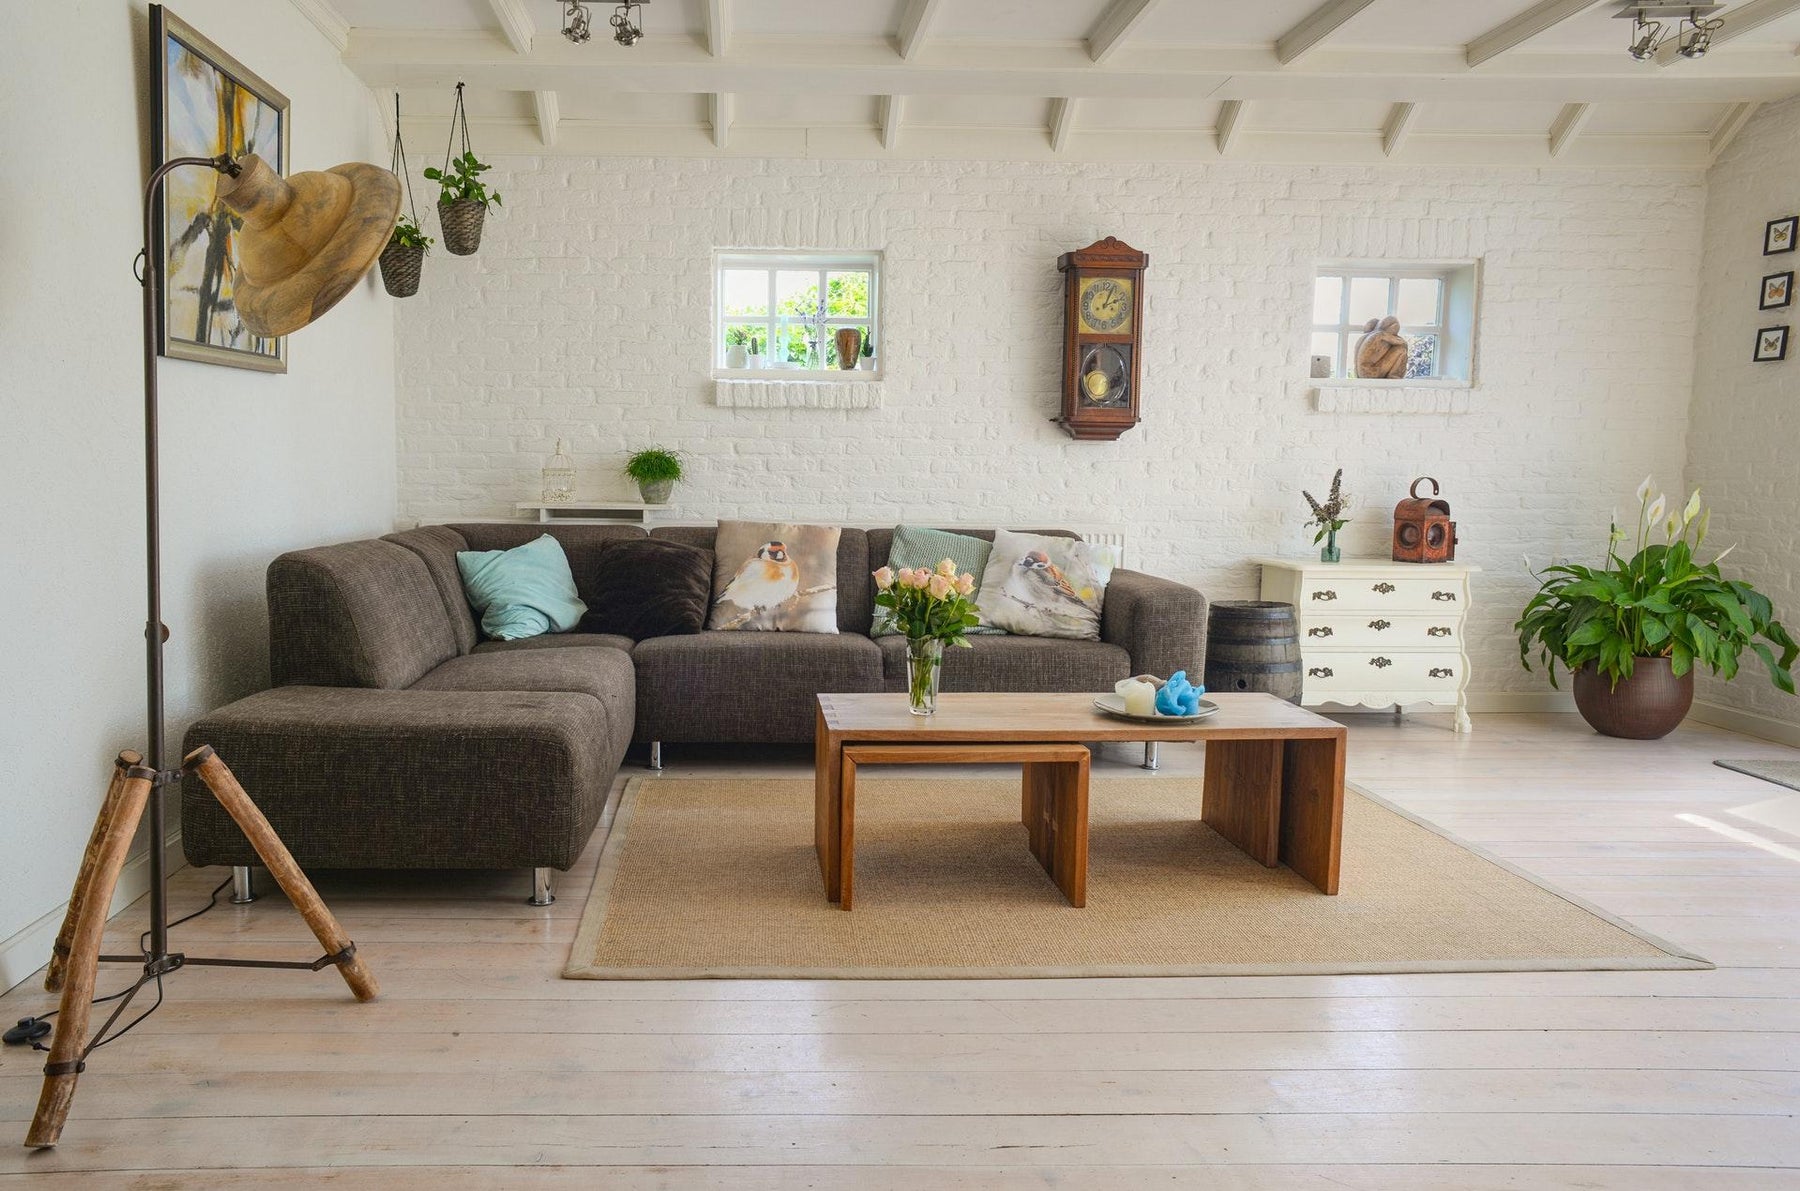 Top 10 Living Room Styling Trends For 2019